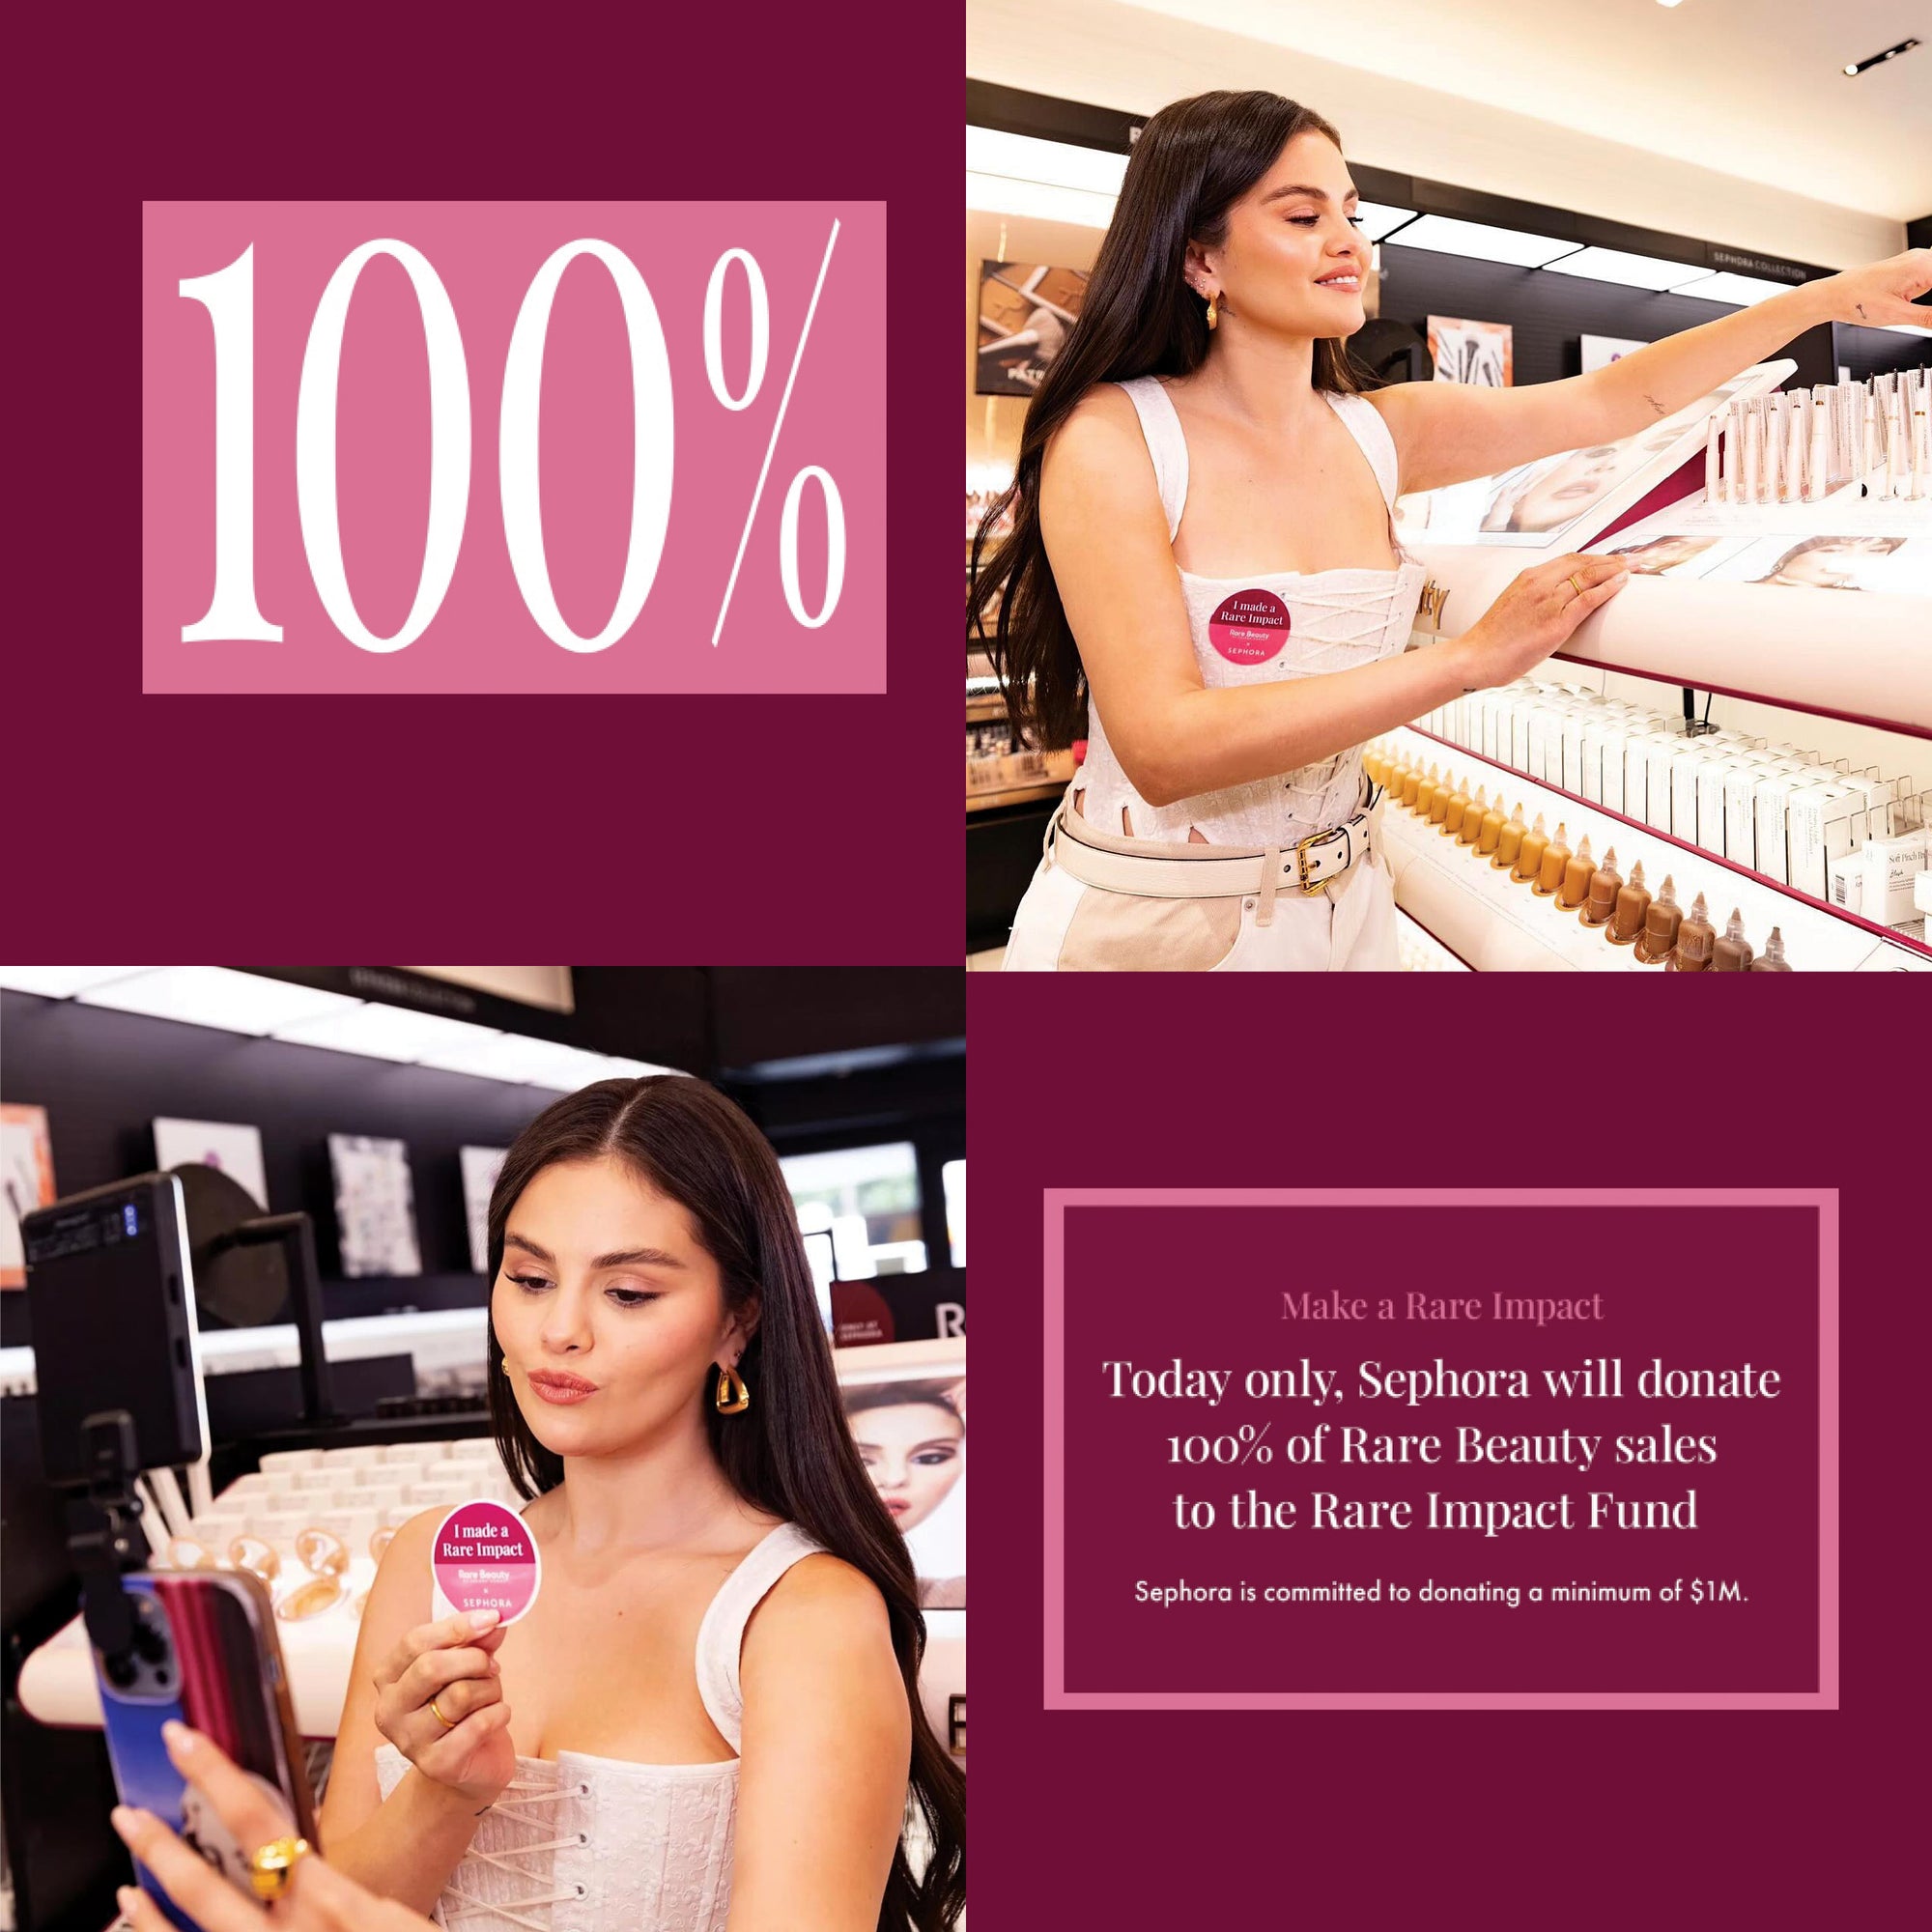 two images of Selena Gomez & an image depicting 100% Sephora Rare Beauty sales dontated to the Rare Impact Fund 